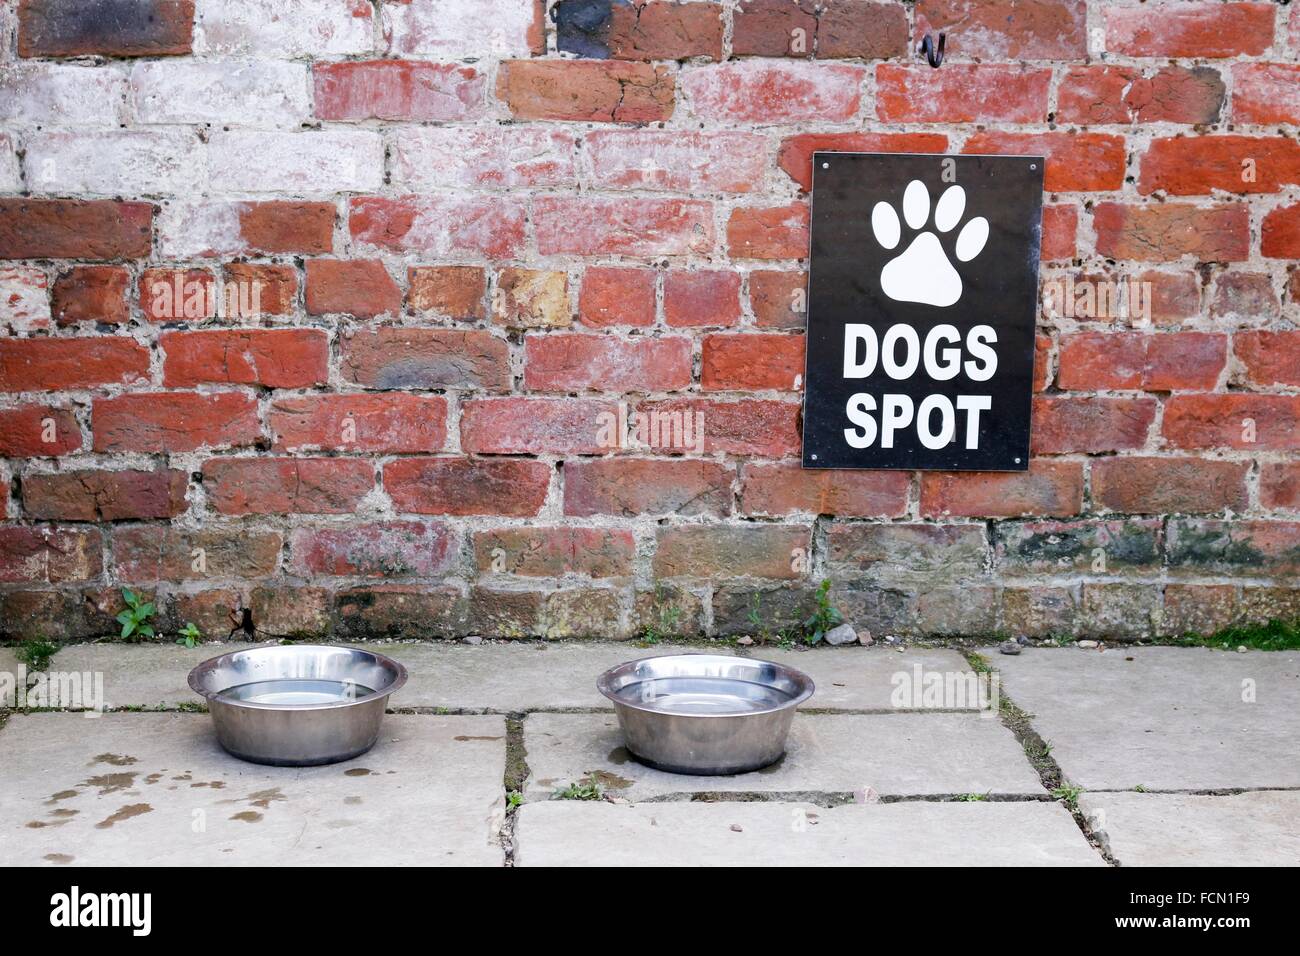 Dogs Spot with bowls of water for dogs to drink. Shooting date 27.06.15 Stock Photo